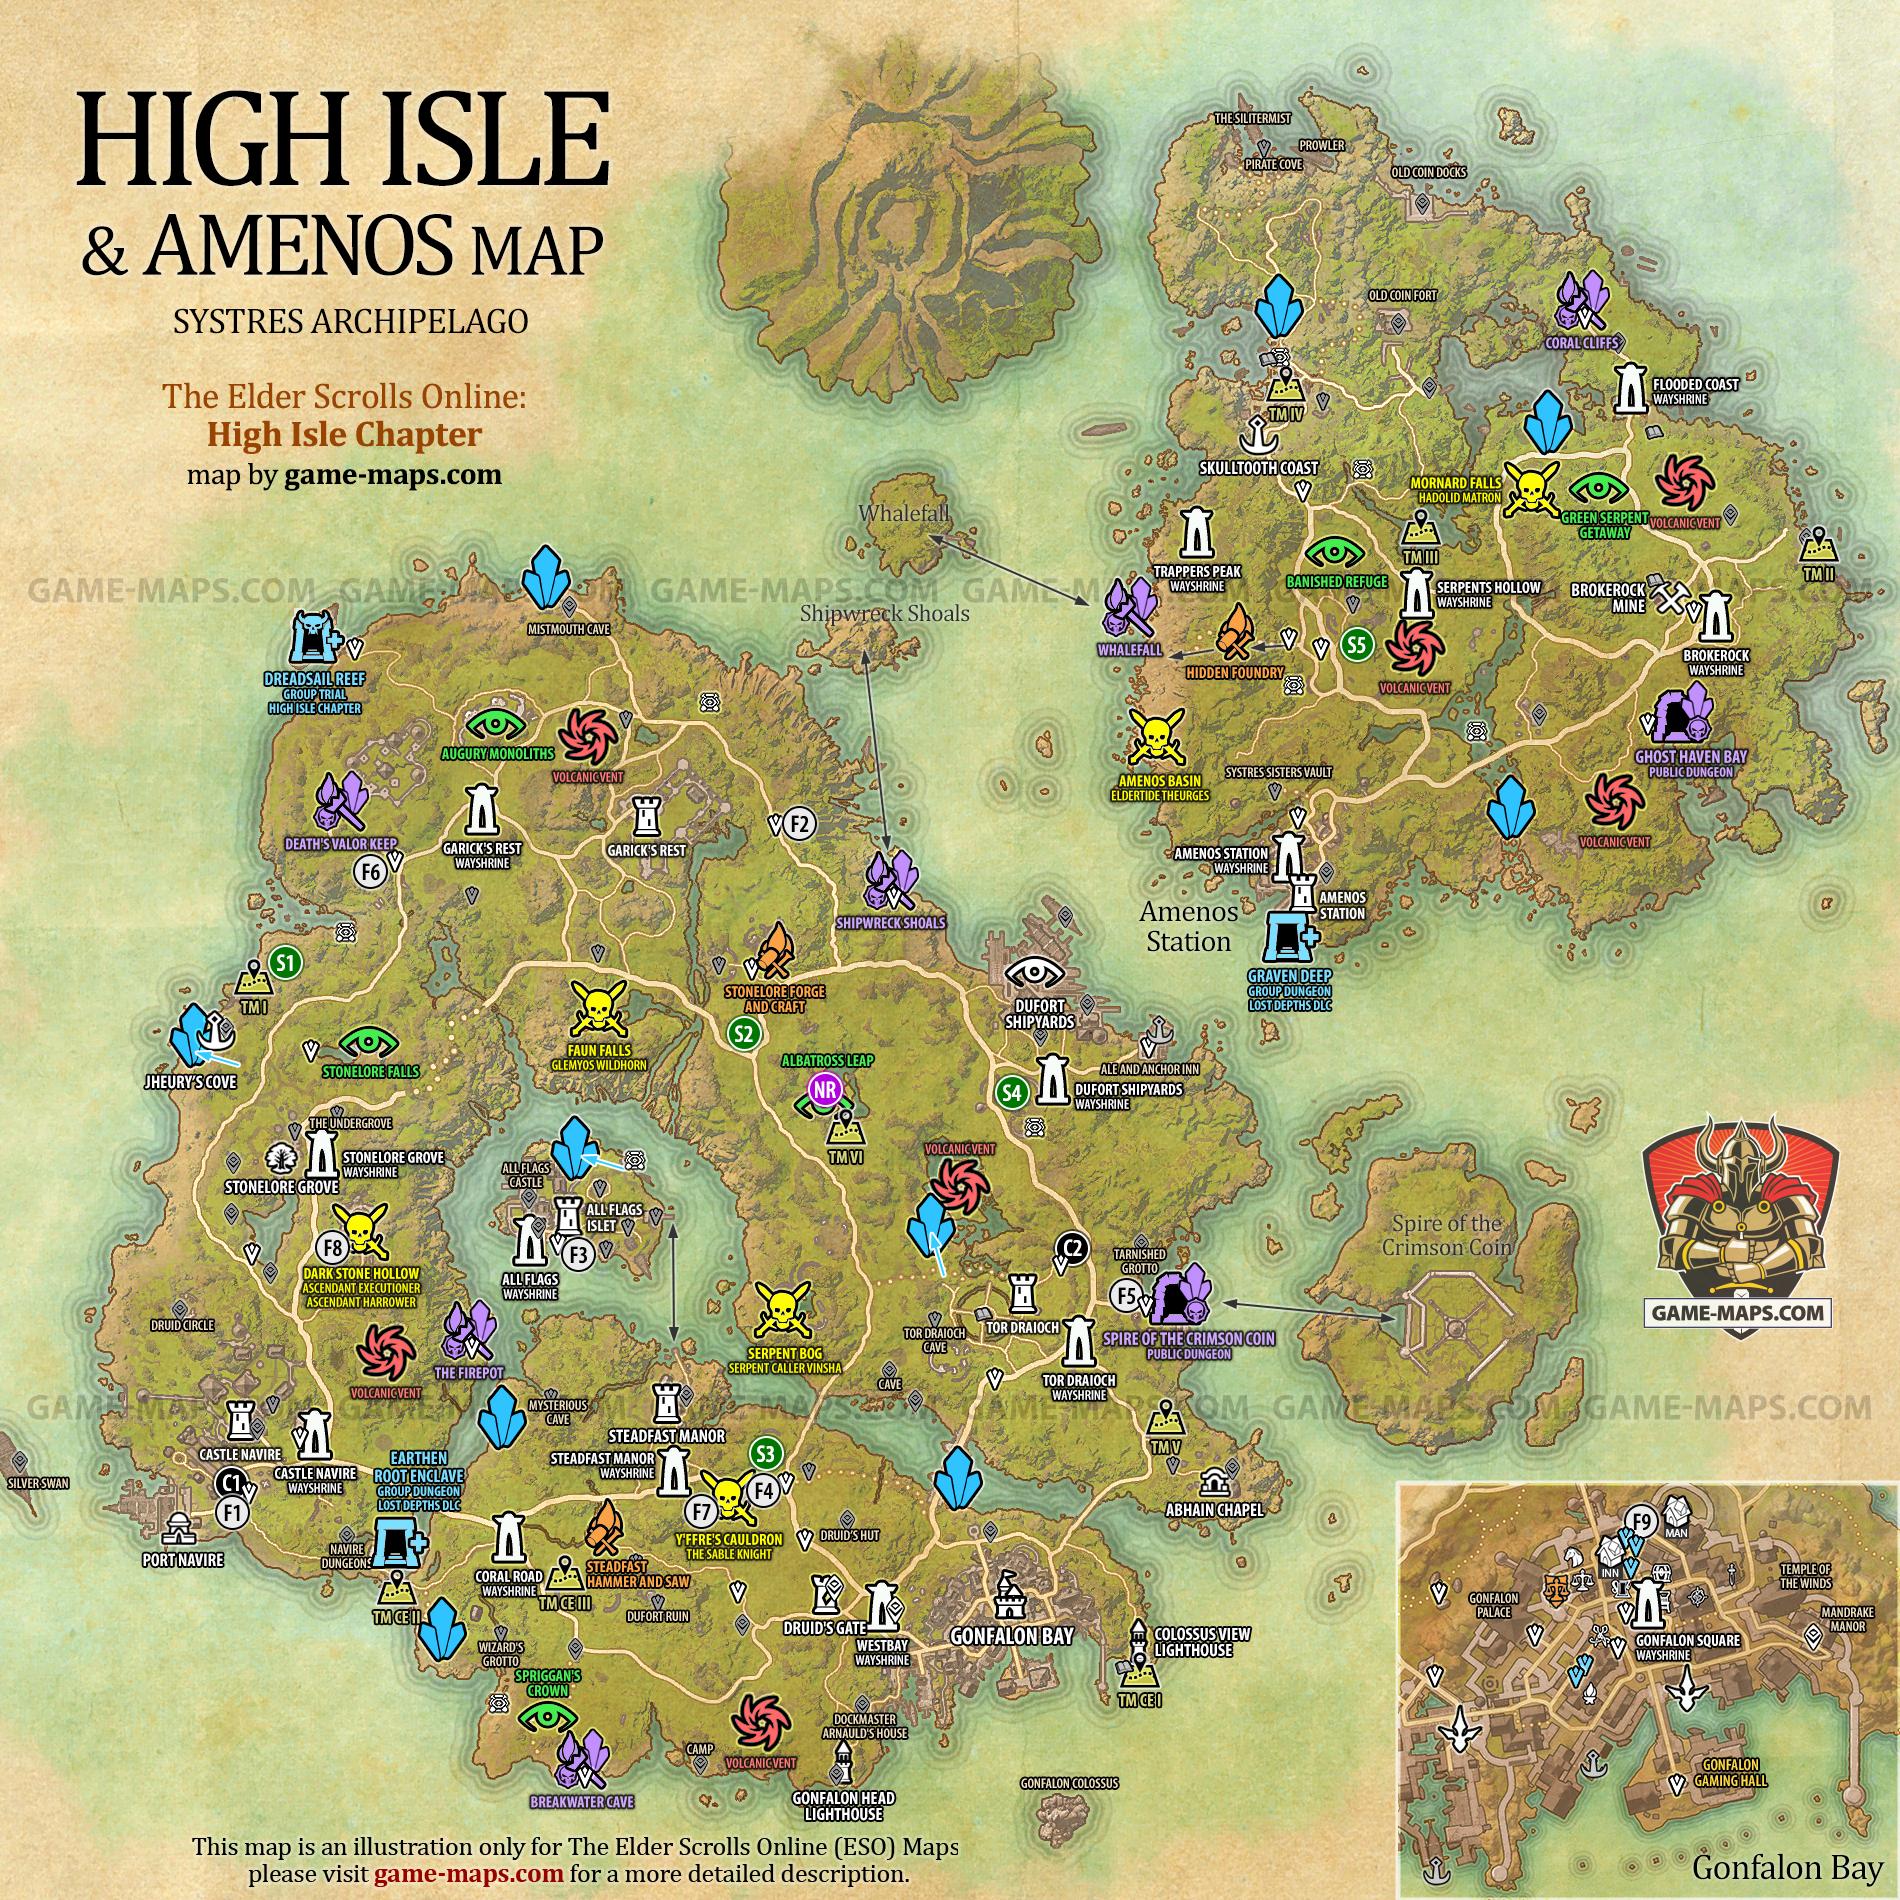 High Isle & Amenos Map for The Elder Scrolls Online: High Isle Chapter, Legacy of the Bretons 2022 Adventure (ESO).